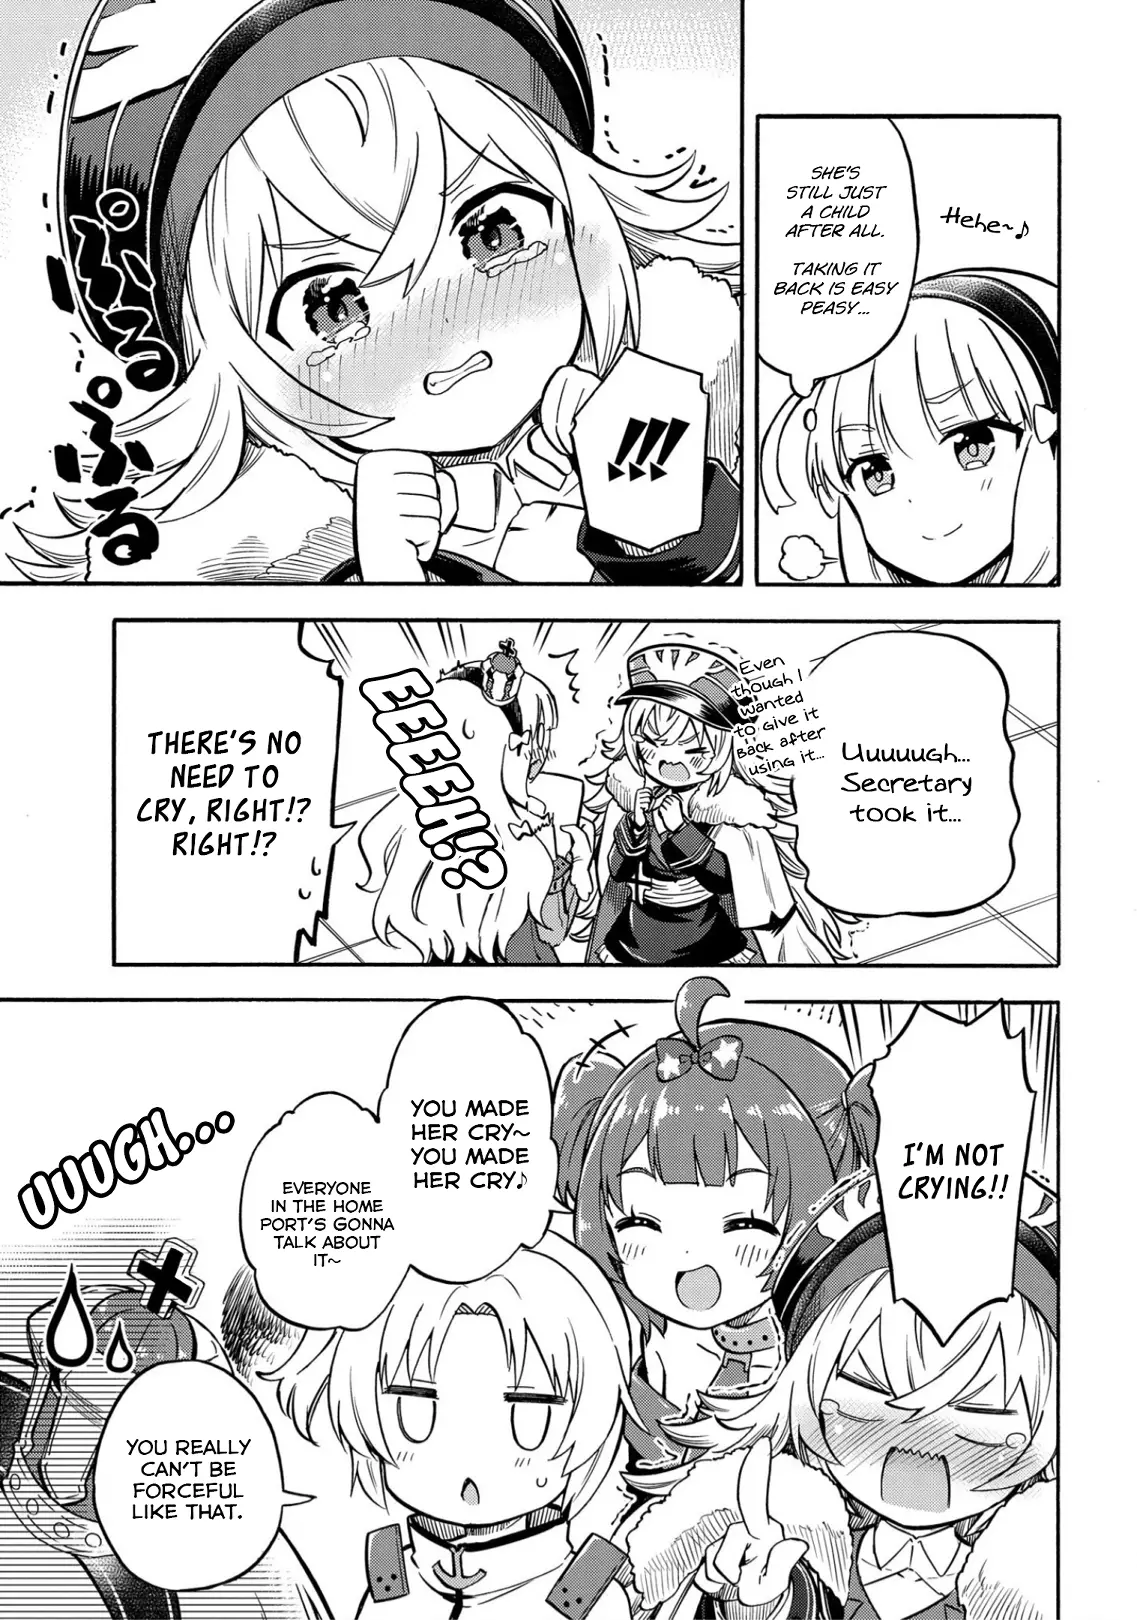 Azur Lane: Queen's Orders - 155 page 3-5d2a0152